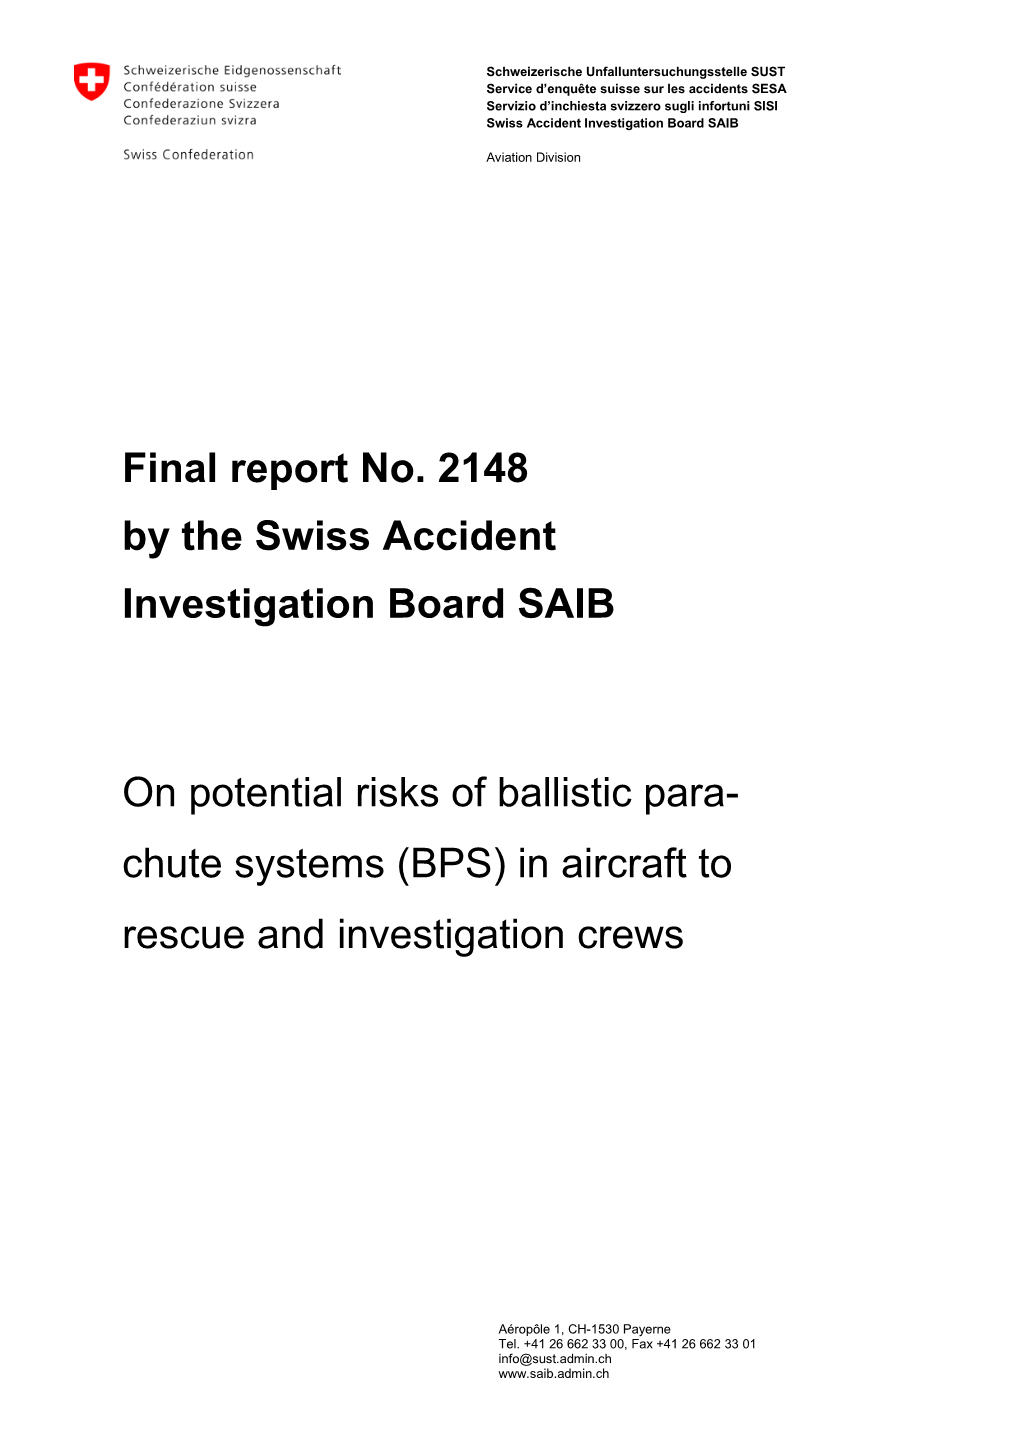 Final Report No. 2148 by the Swiss Accident Investigation Board SAIB on Potential Risks of Ballistic Para- Chute Systems (BPS) I